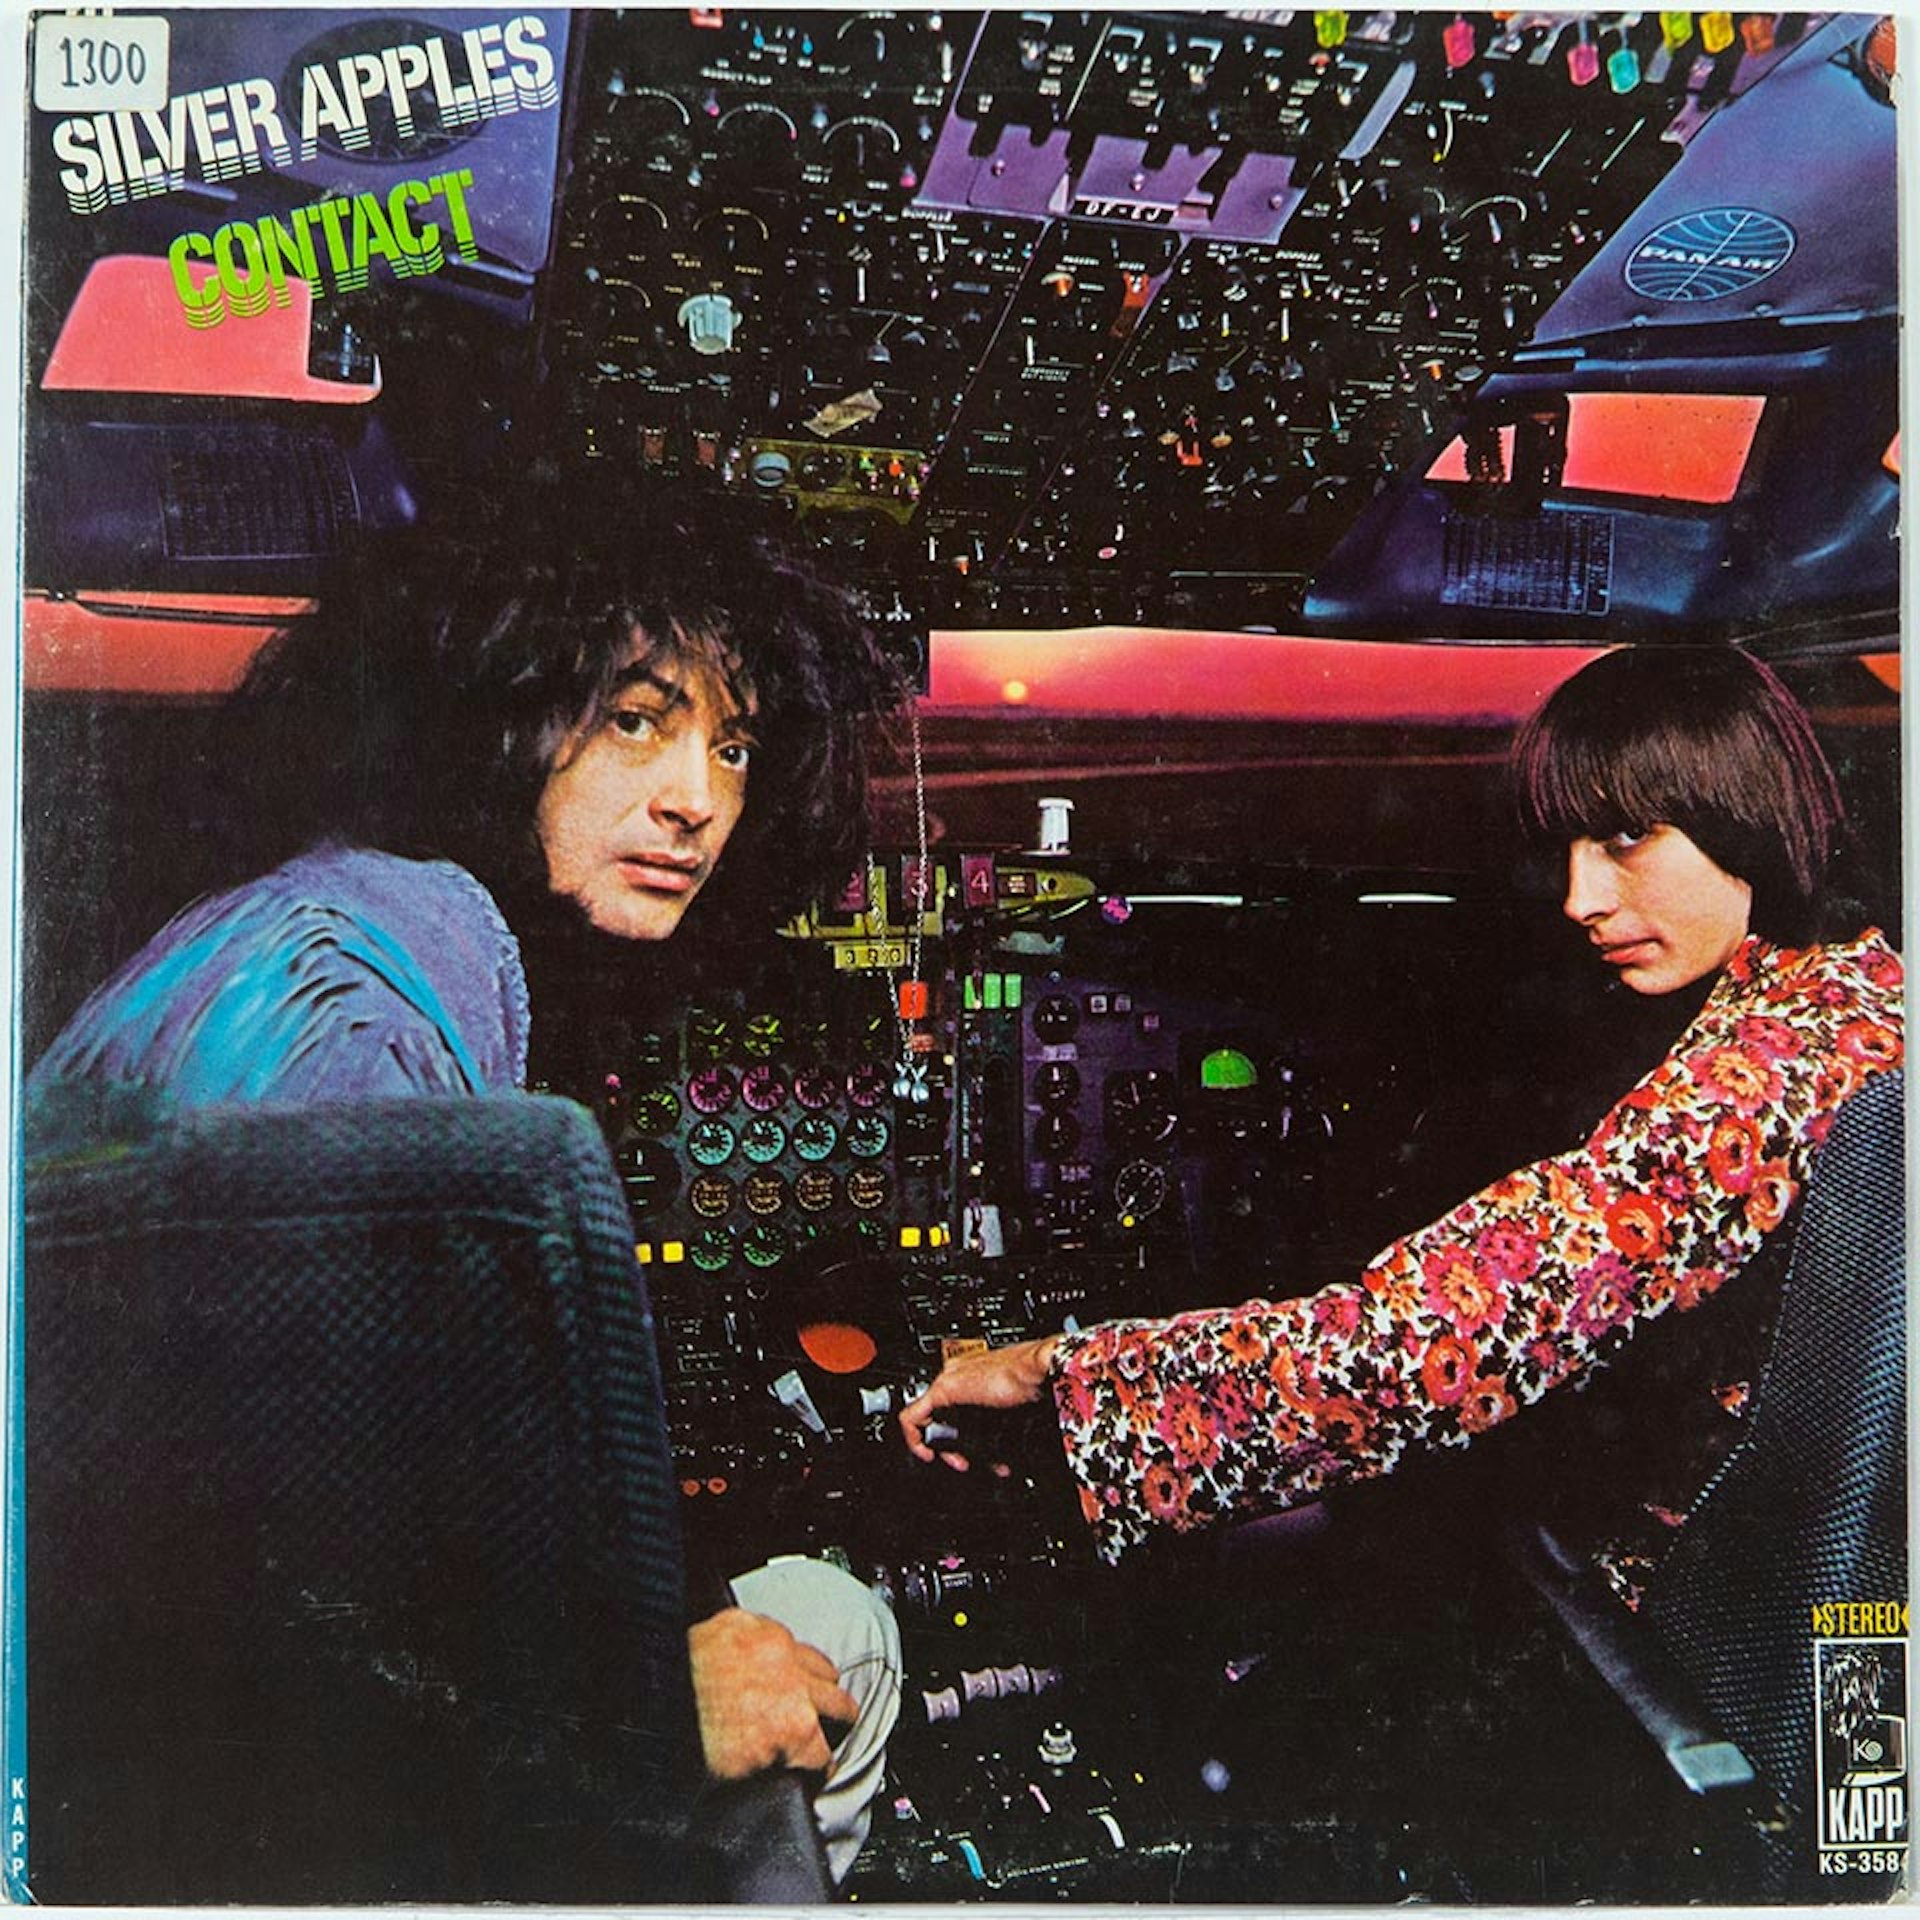 contact silver apples